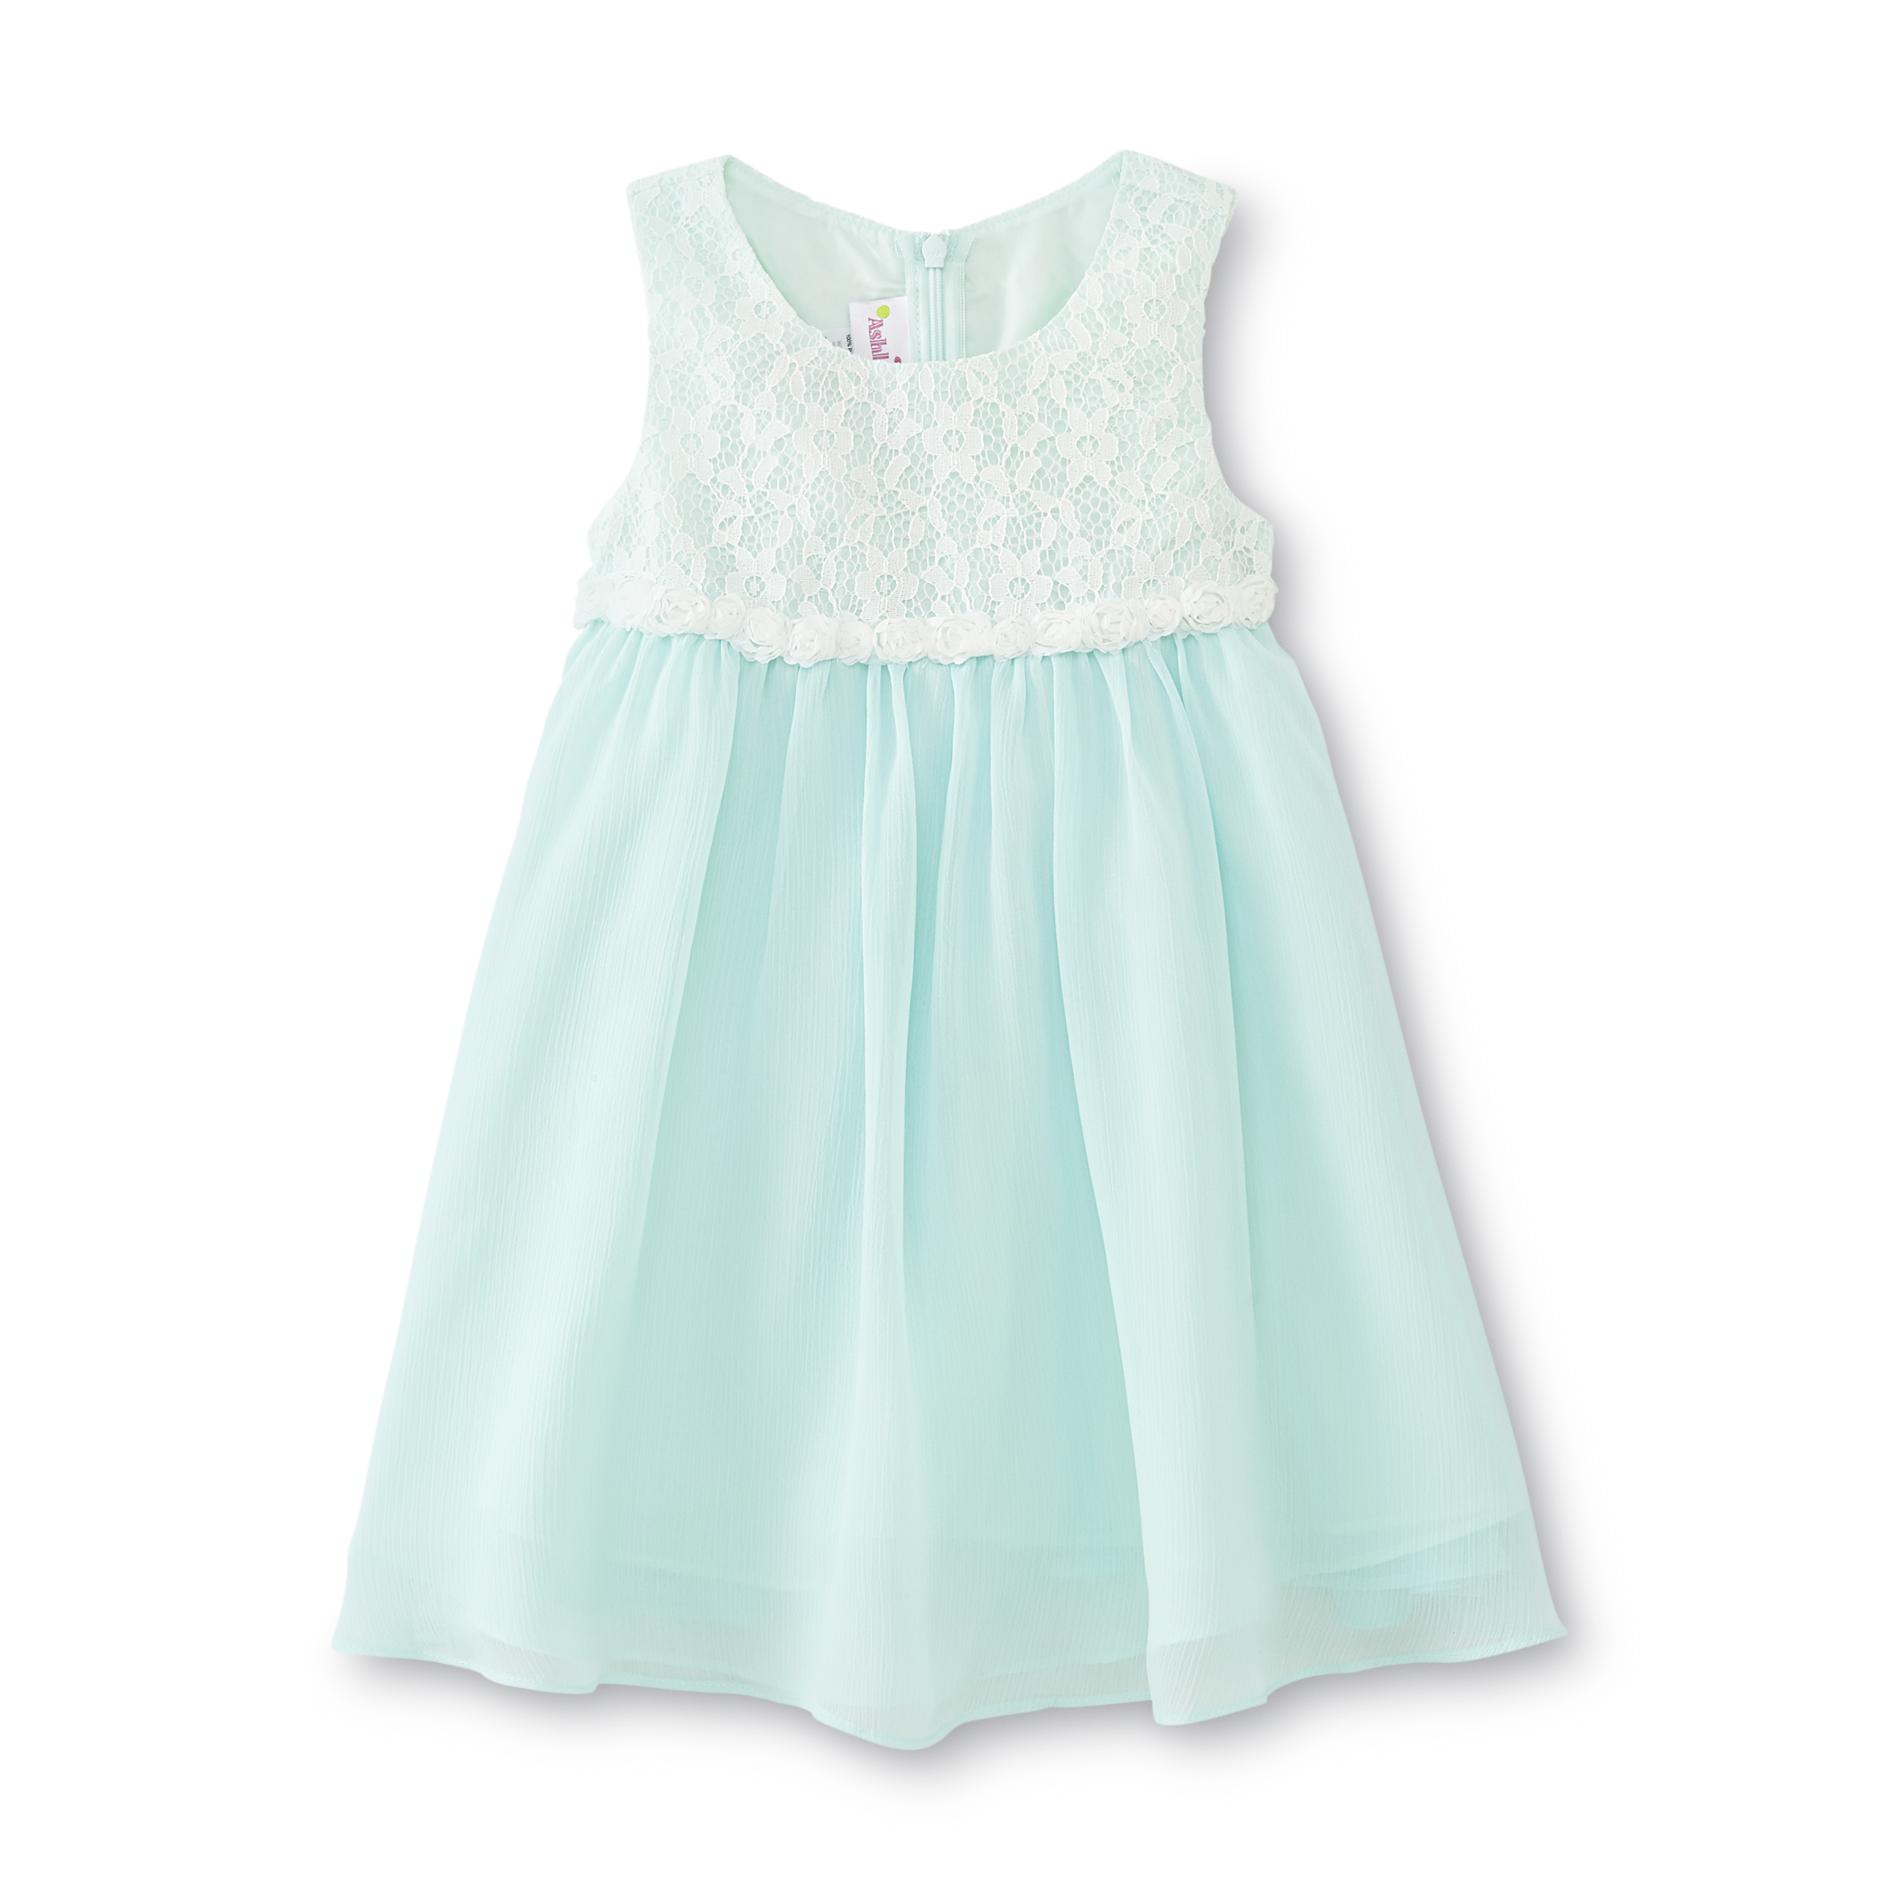 Ashley Ann Infant & Toddler Girl's Lace Occasion Dress